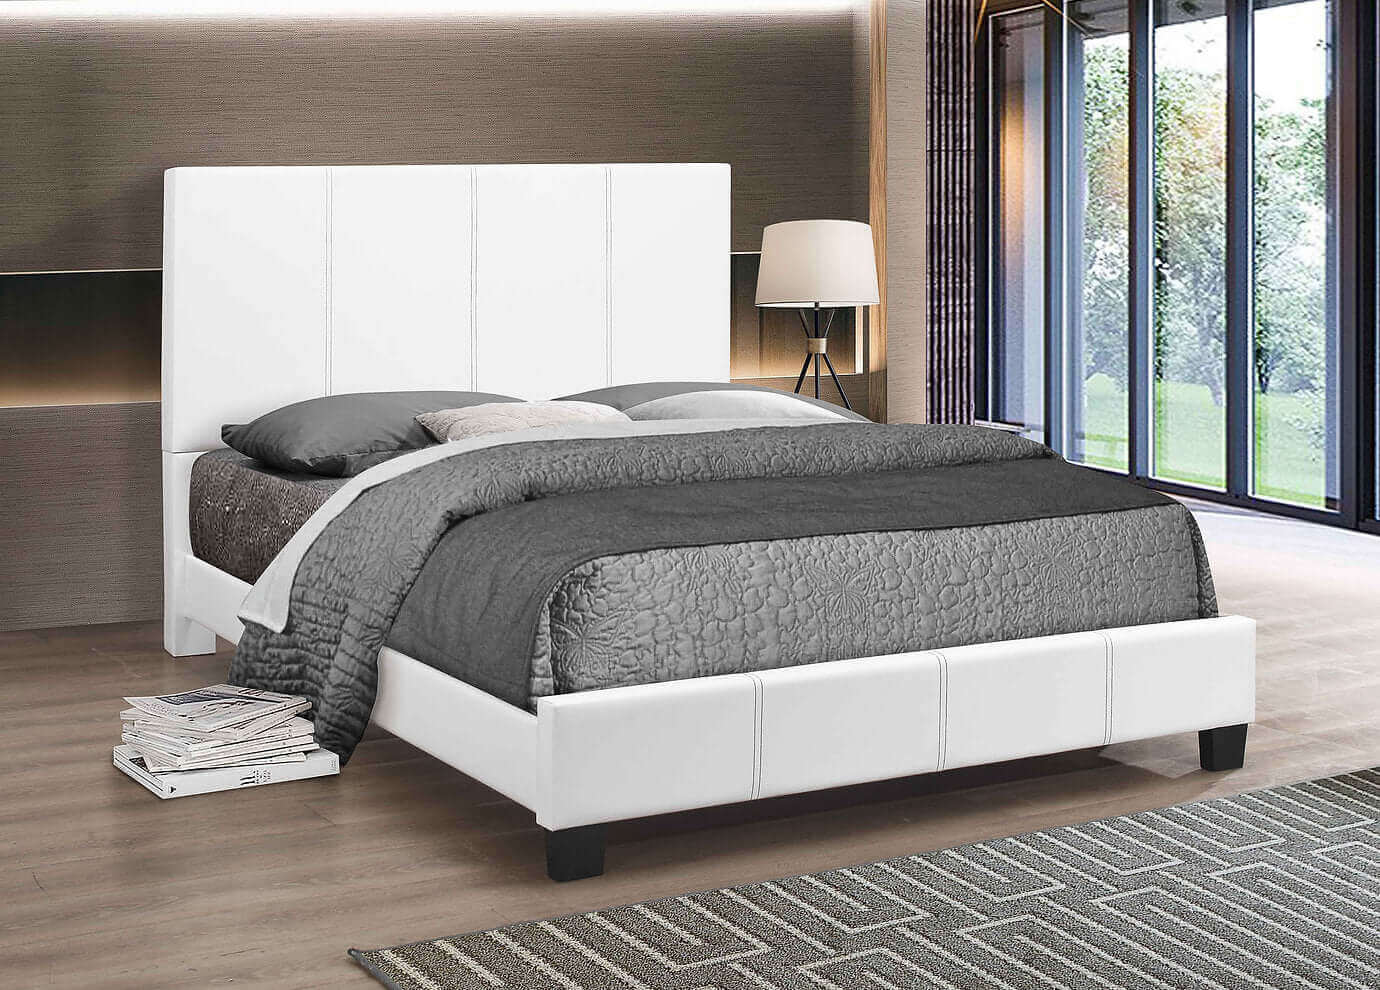 International Furniture Distribution Centre - White PU Bed with Contrast Stitching - IF 5471 - D